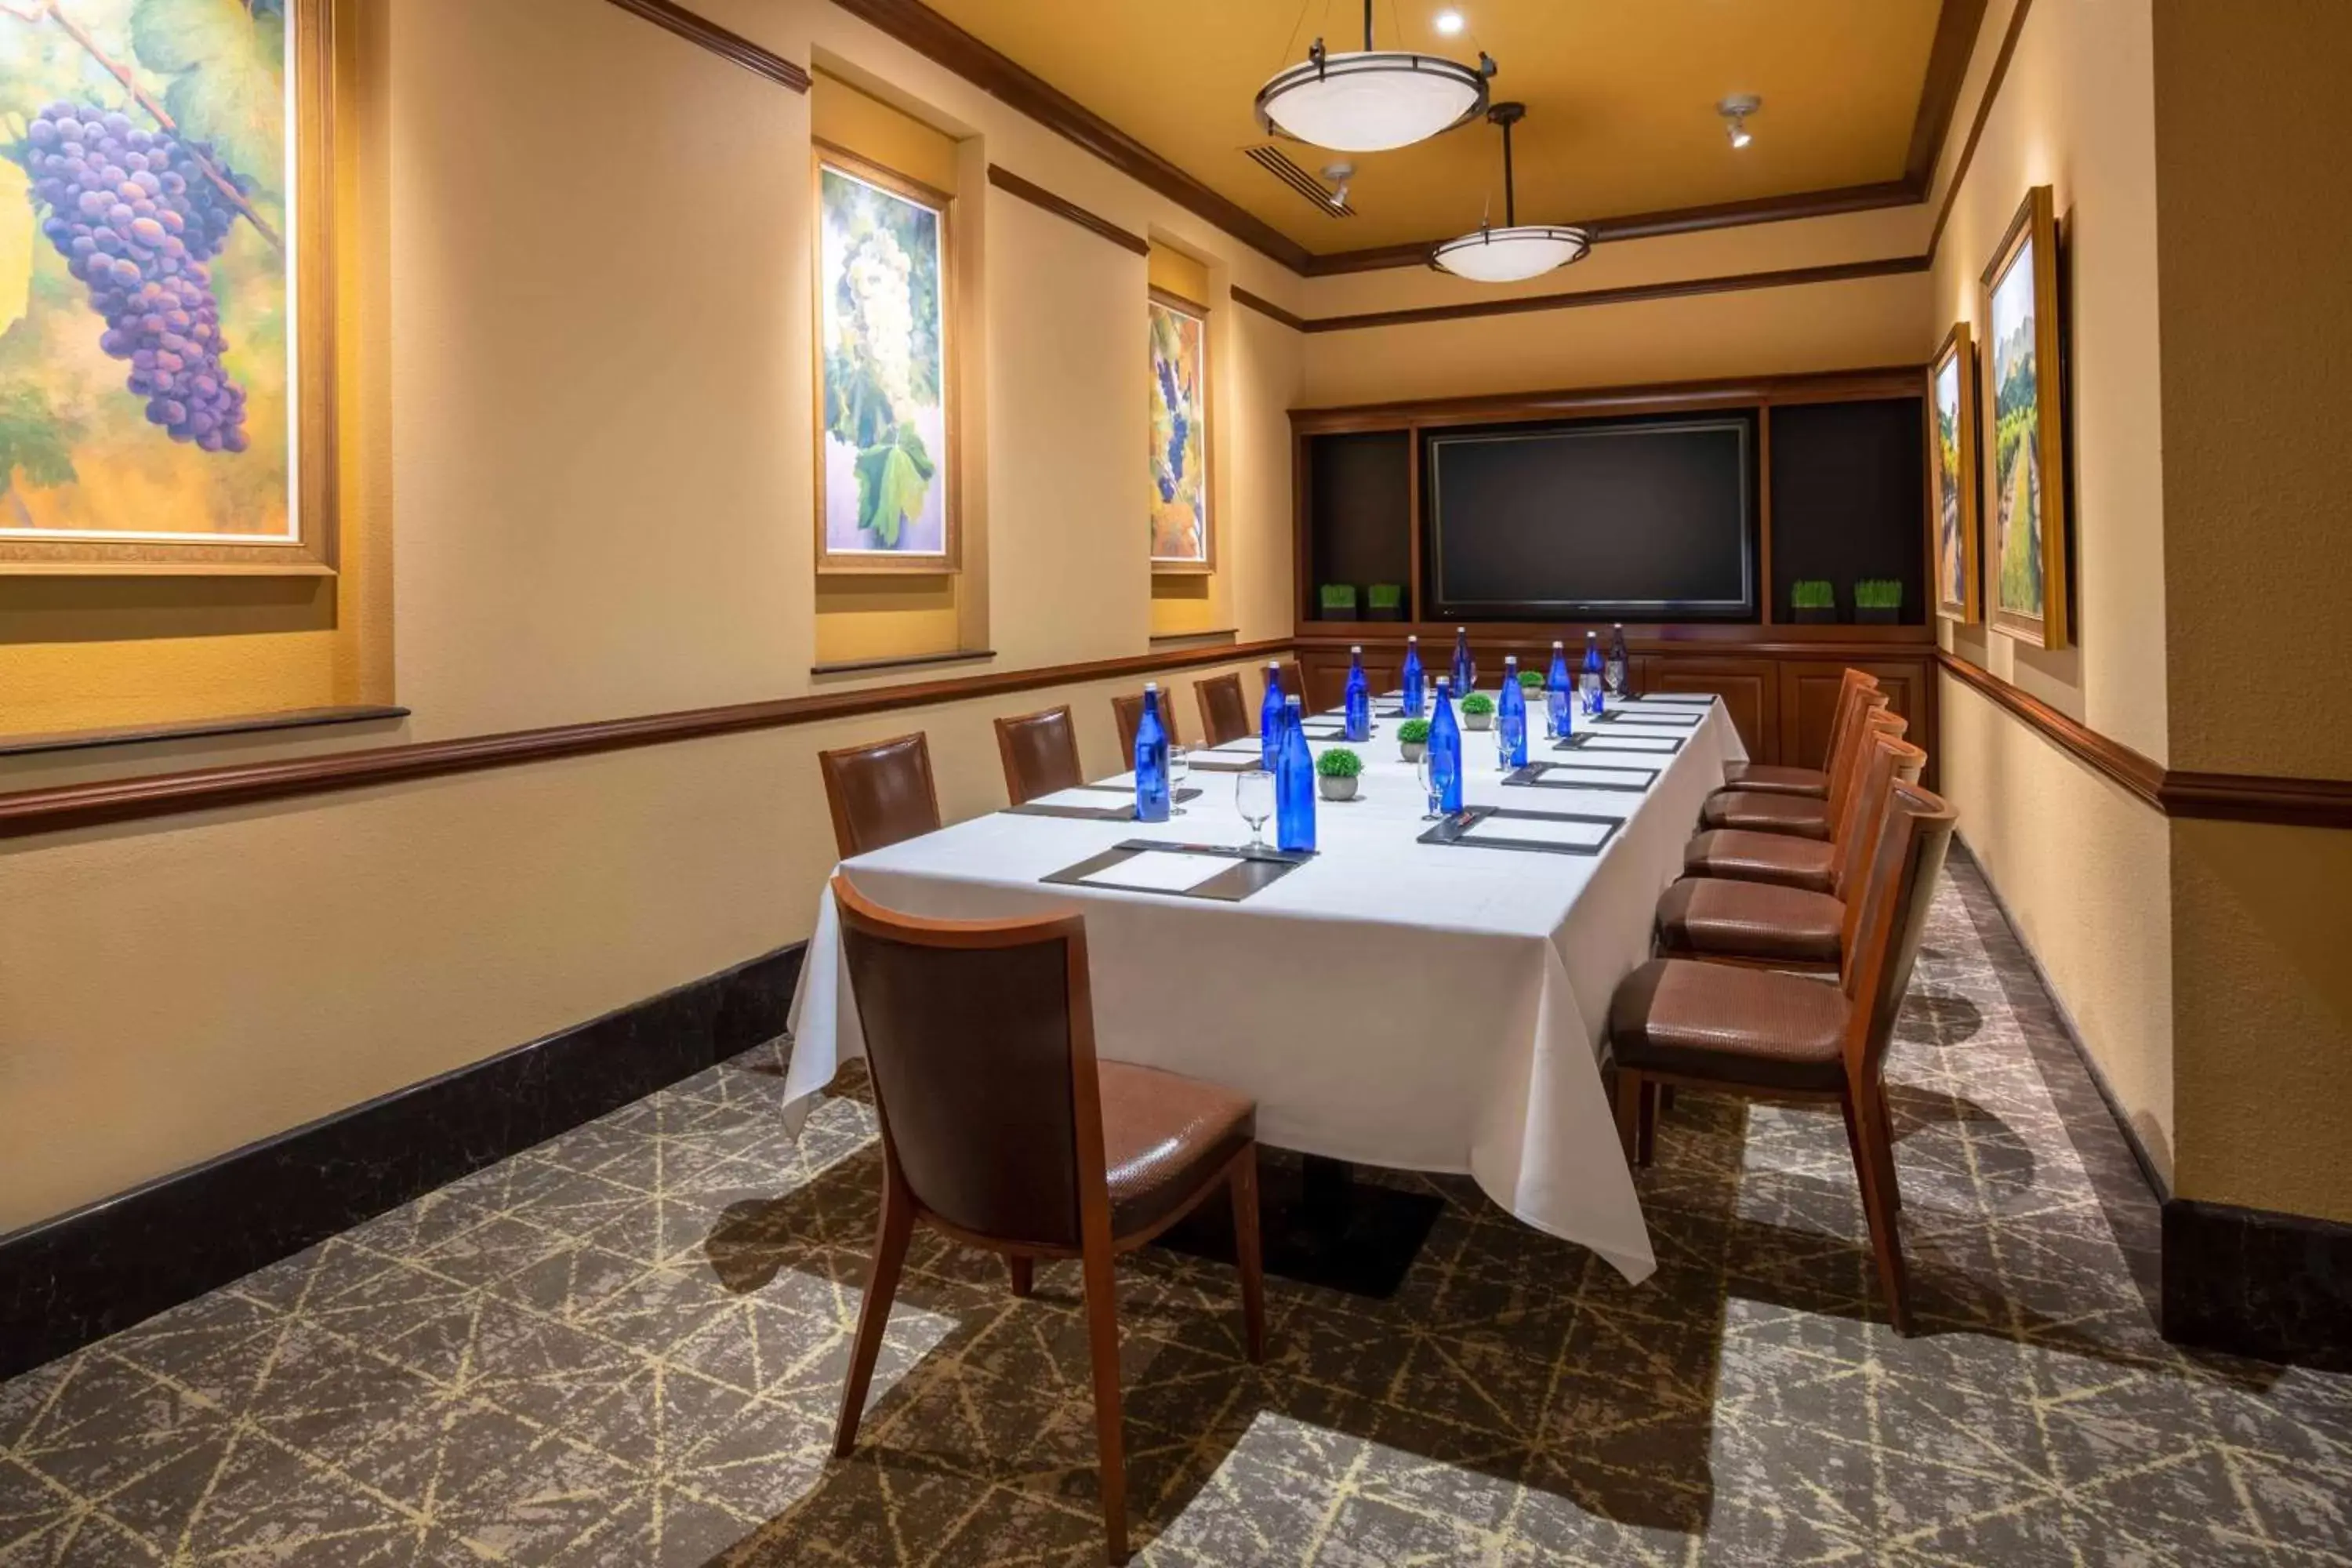 Meeting/conference room in Embassy Suites by Hilton Sacramento Riverfront Promenade